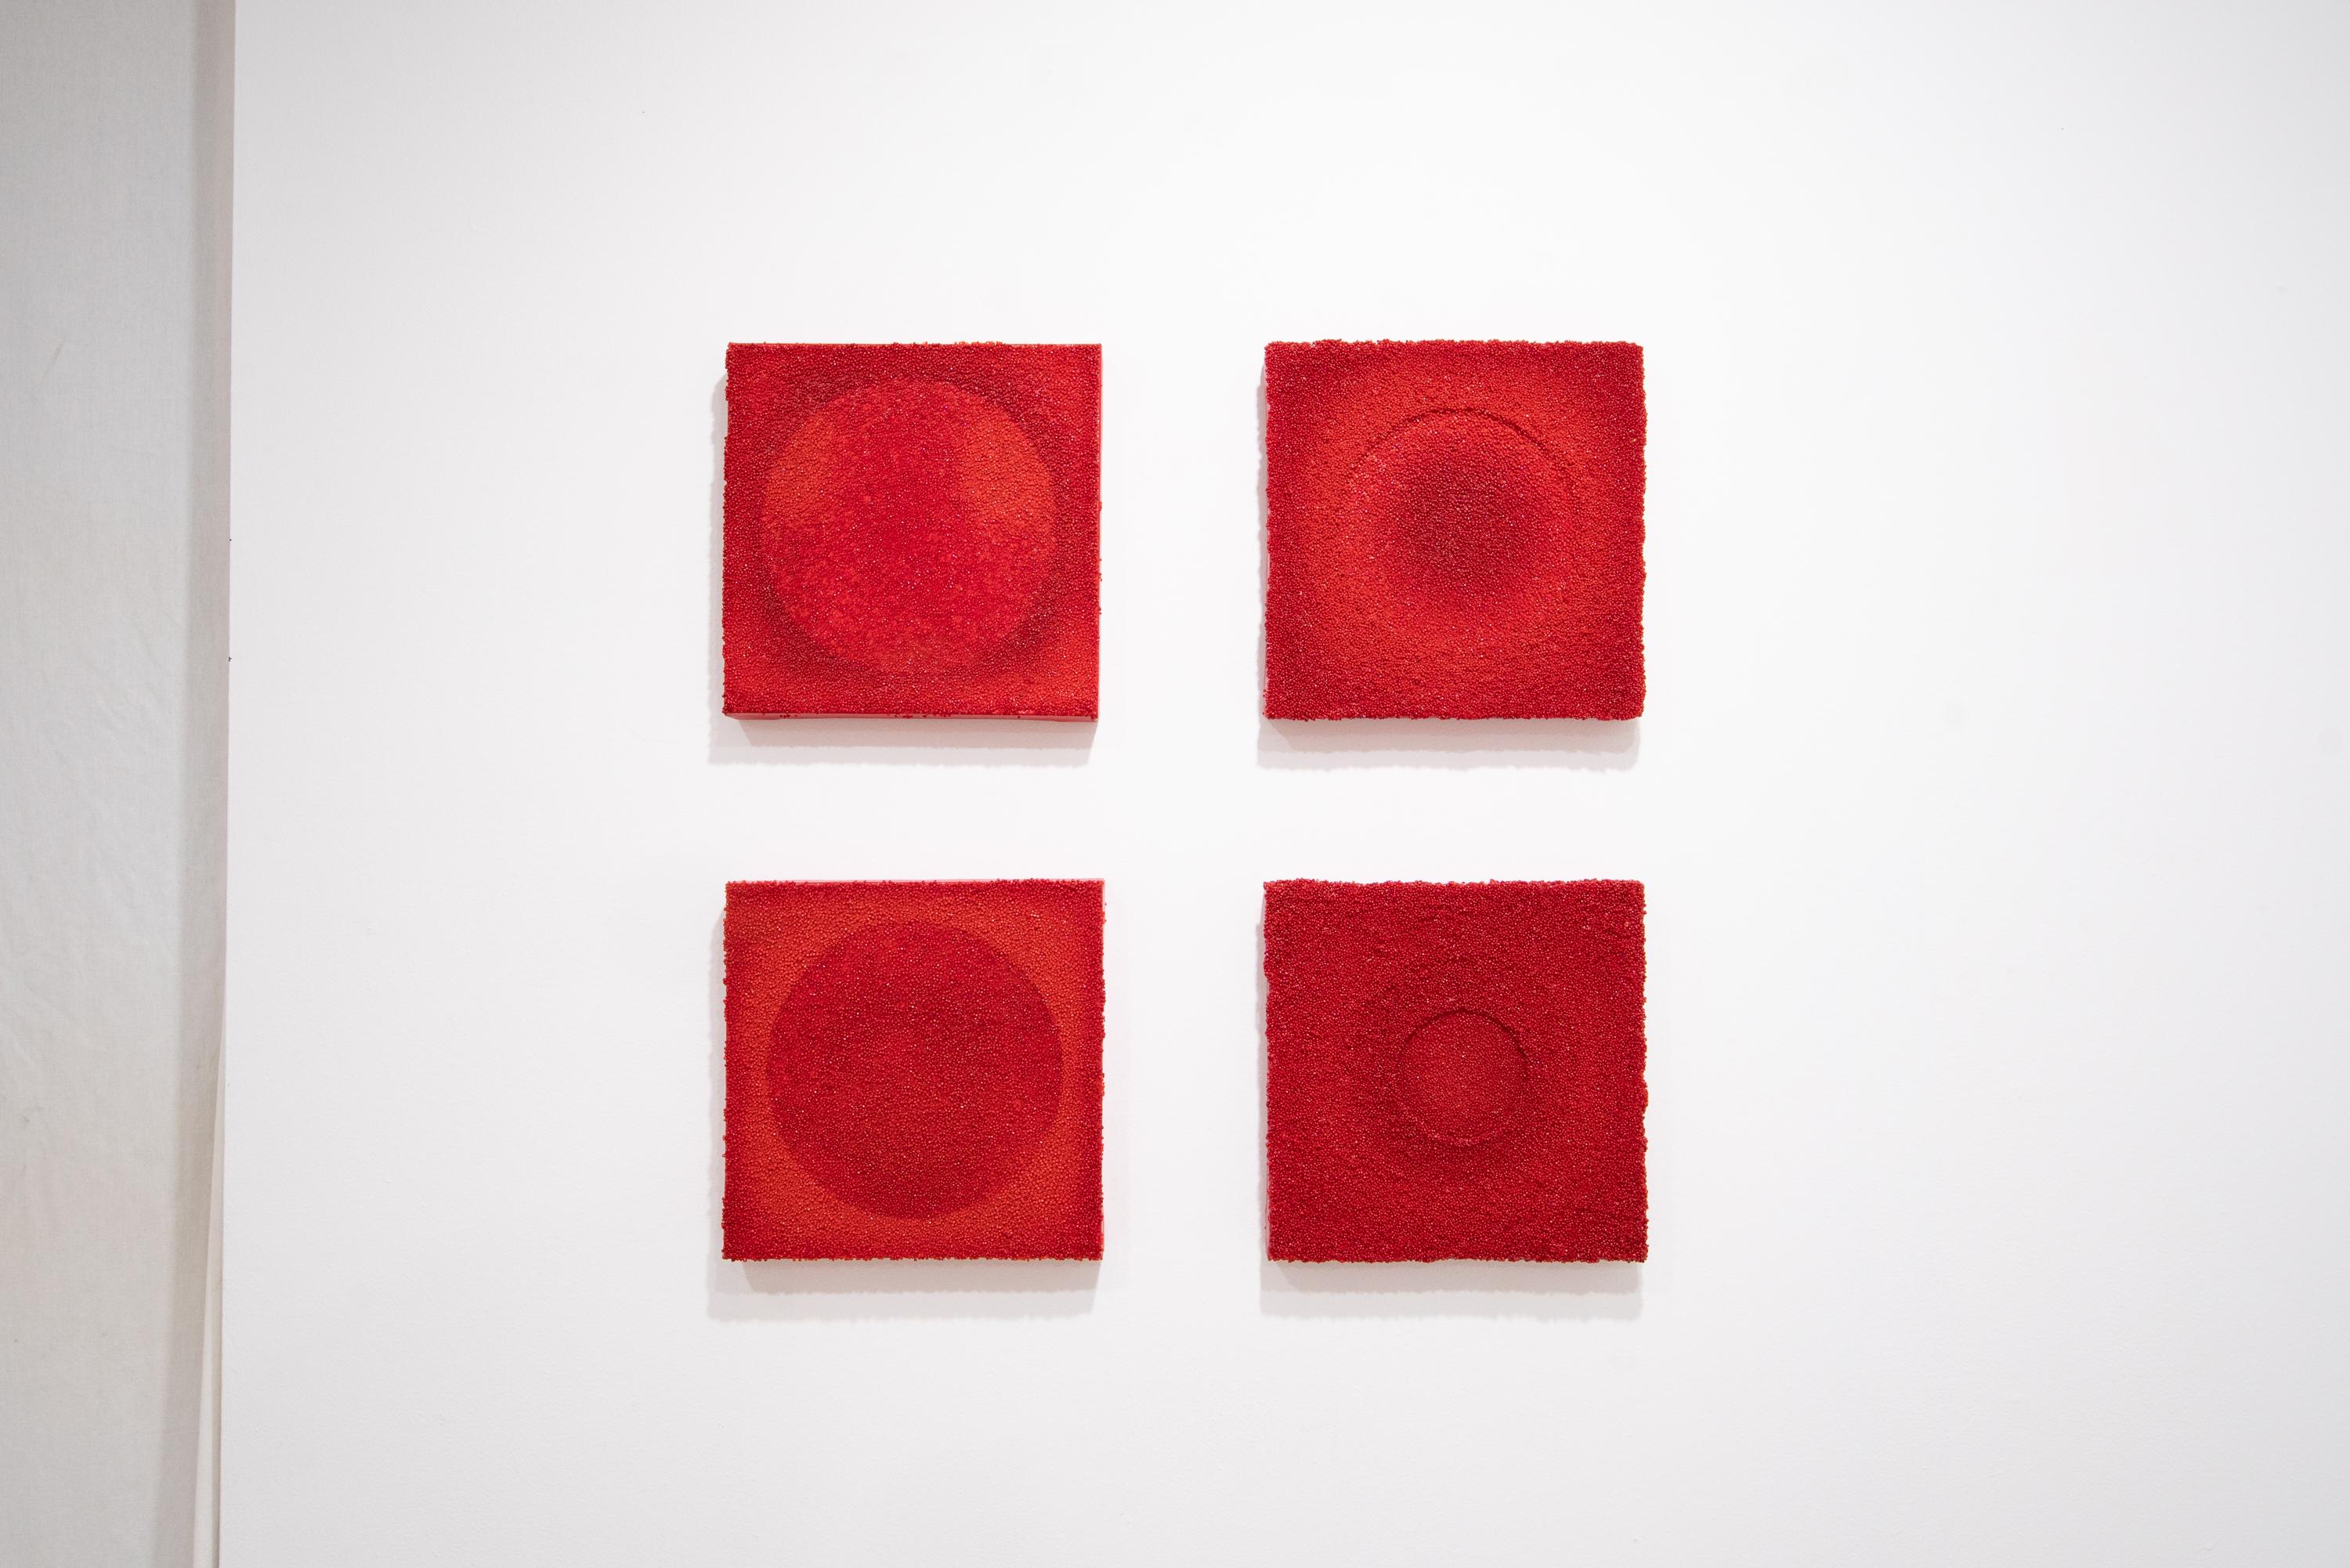 Tantra 67: minimalist abstract spiritual mandala sculpture painting, red circles - Red Abstract Sculpture by Antonio Puri